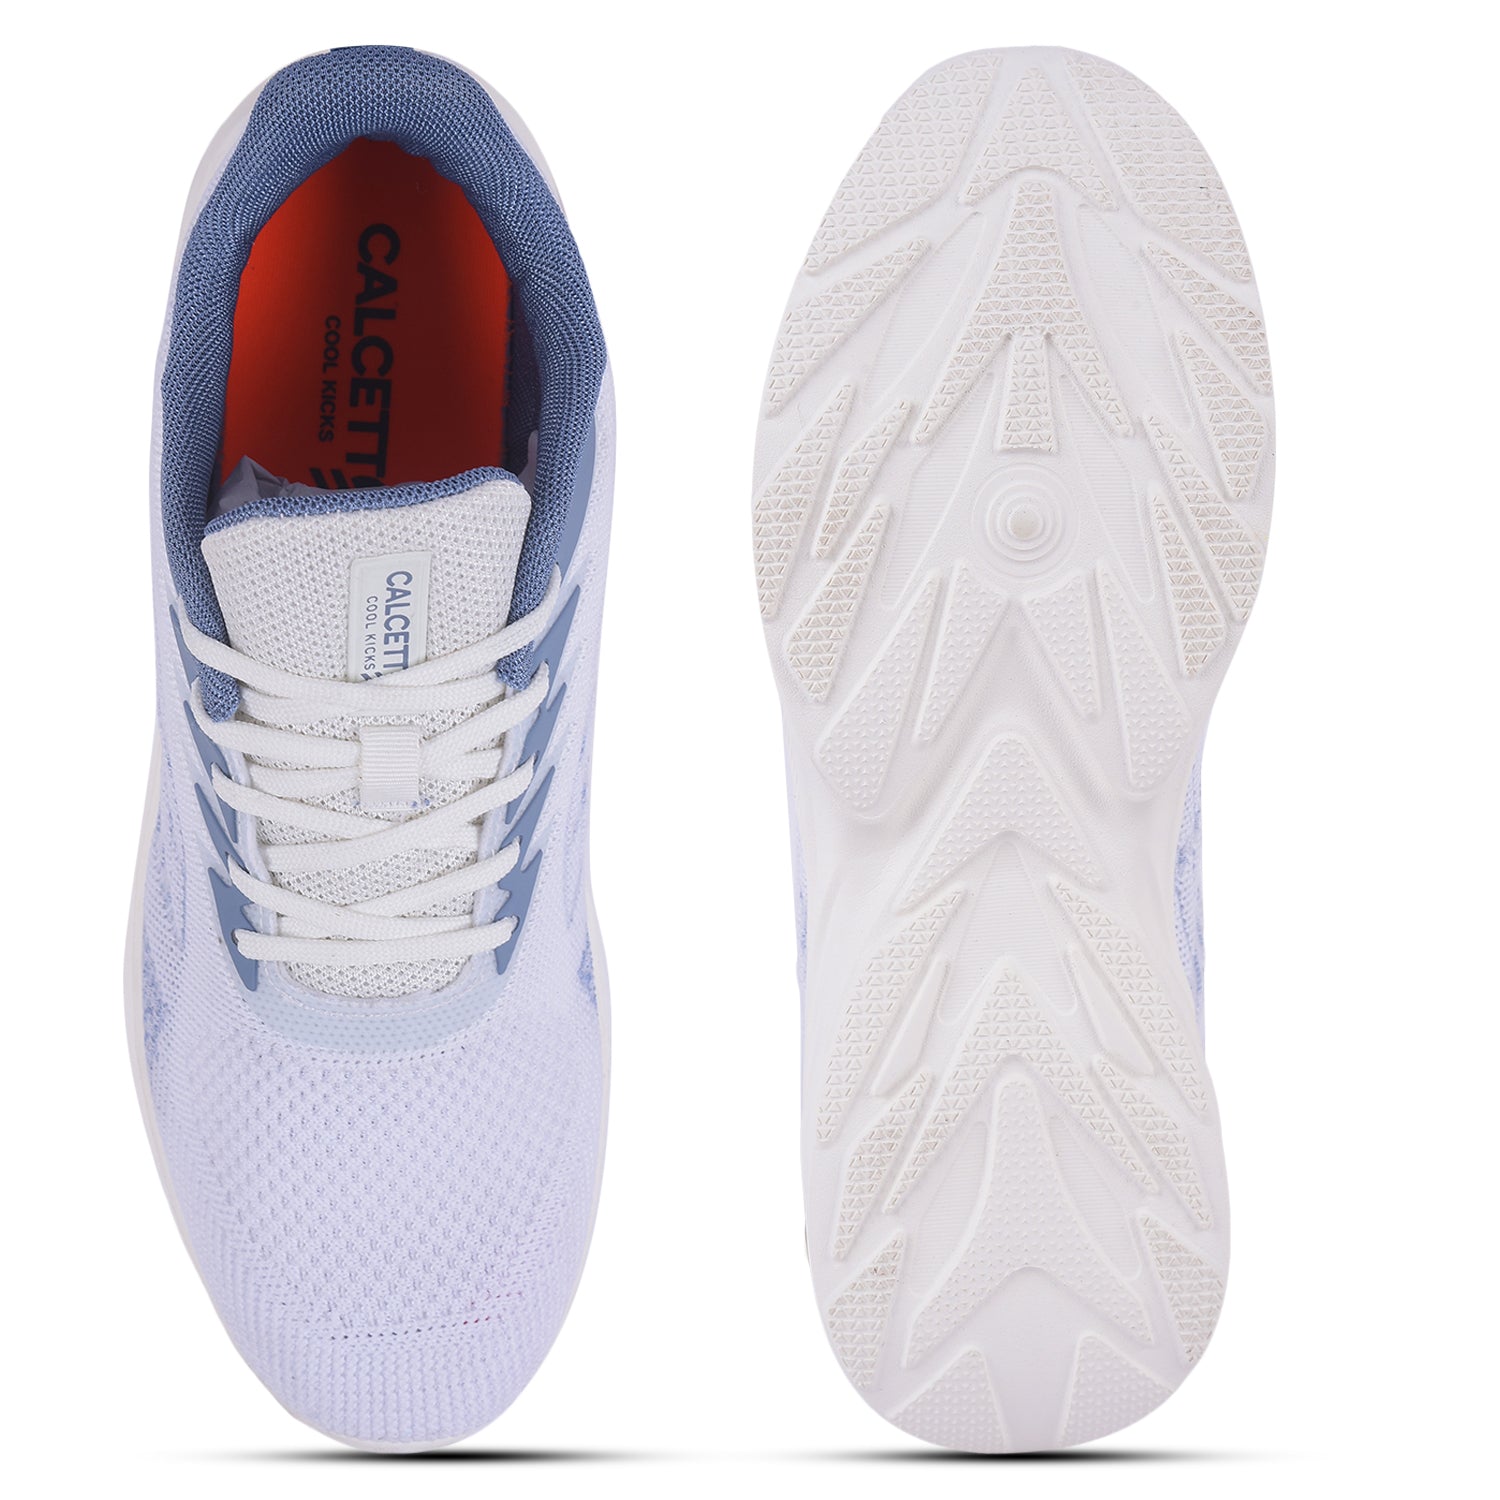 Calcetto CLT-2045 White Blue Sports Shoes For Men